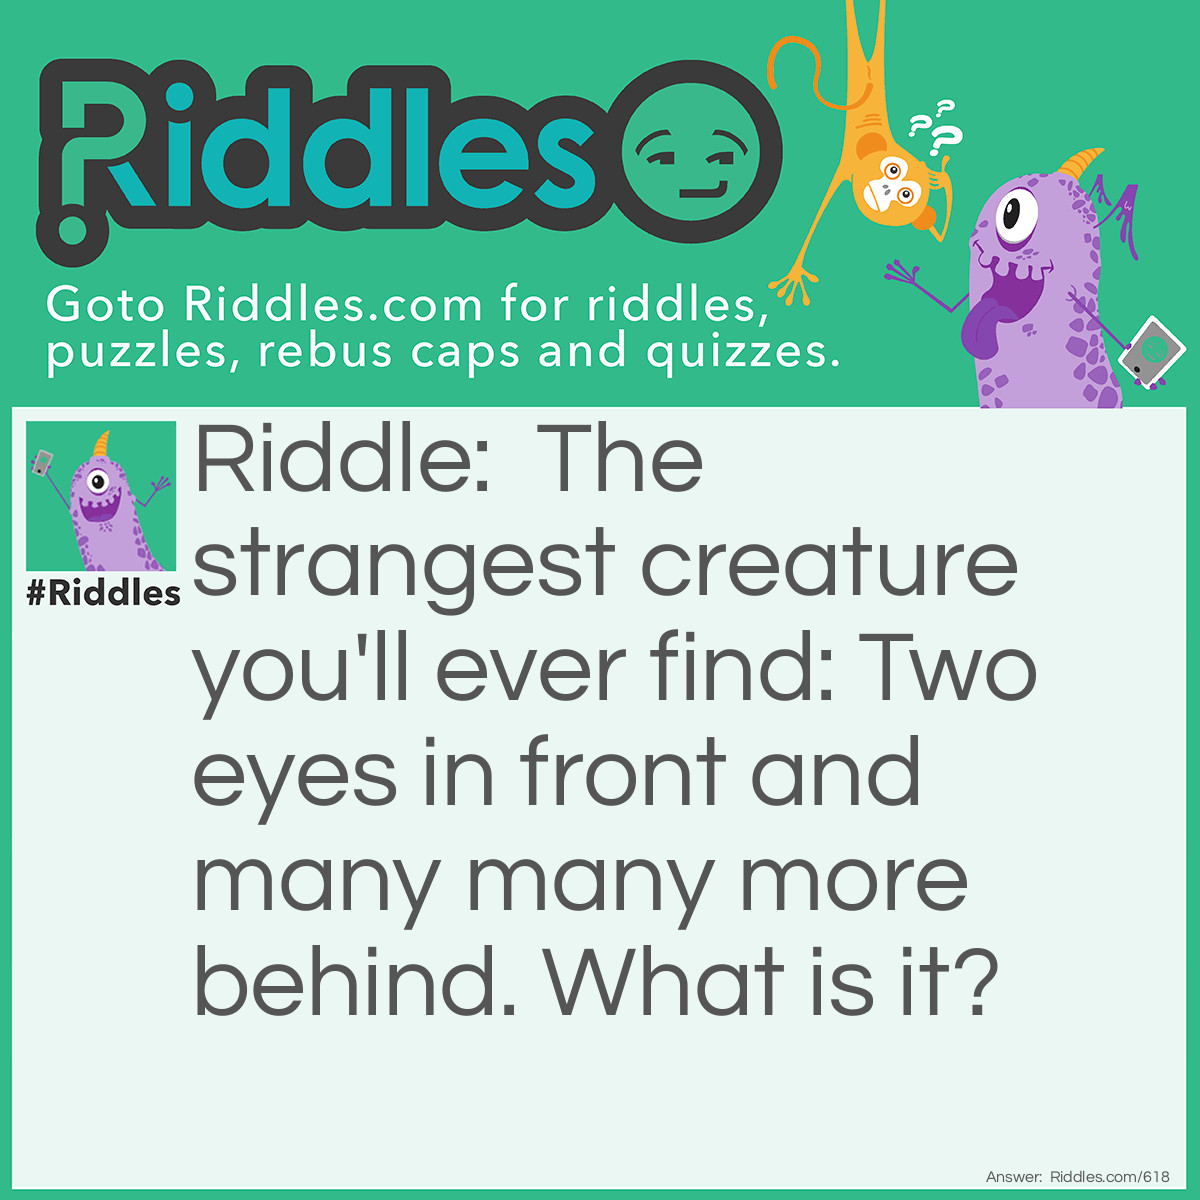 Riddle: The strangest creature you'll ever find: Two eyes in front and many many more behind. What is it? Answer: A Peacock.